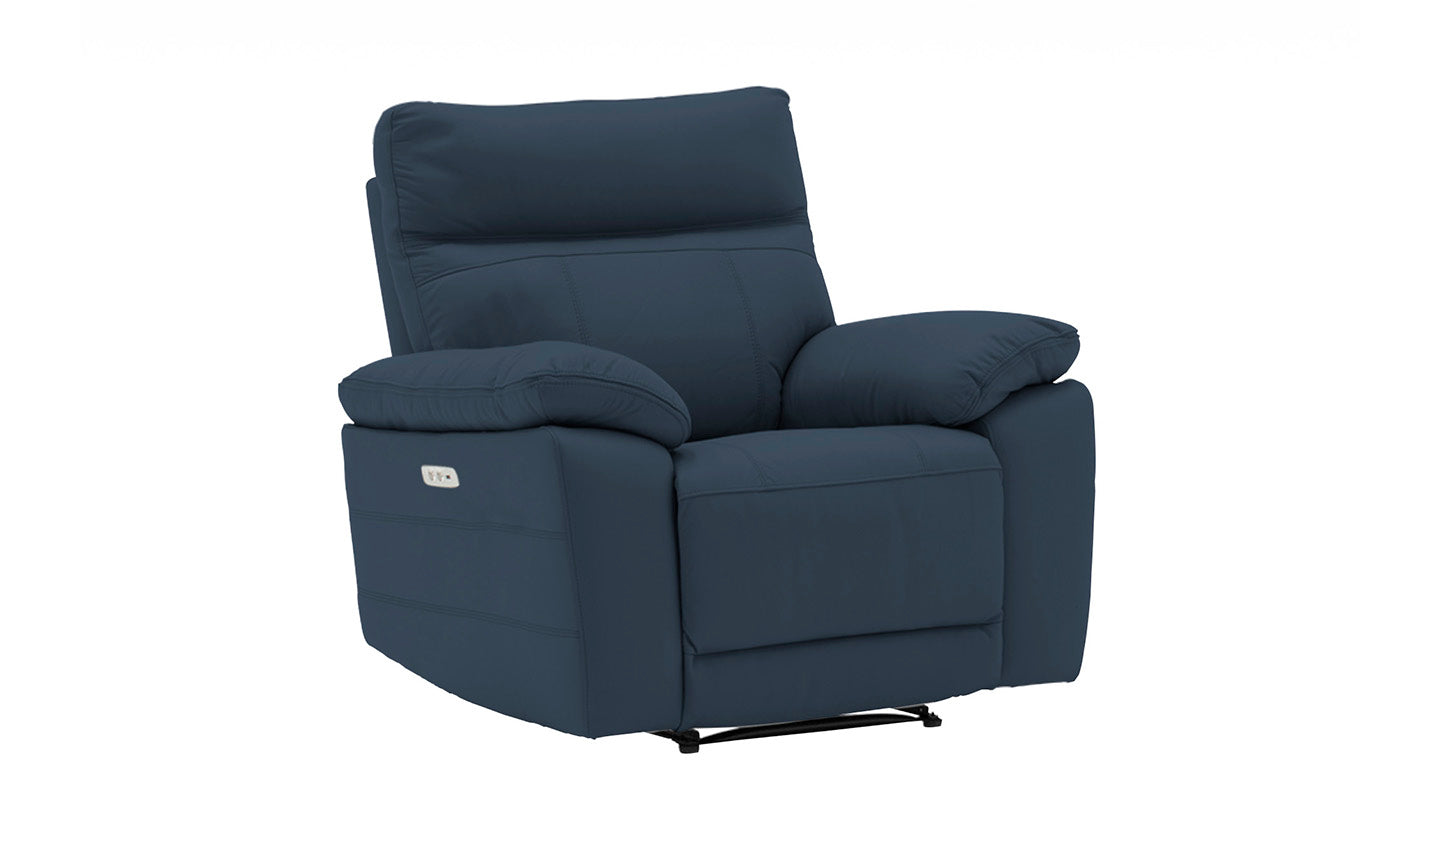 Positano Leather Electric Recliner Chair